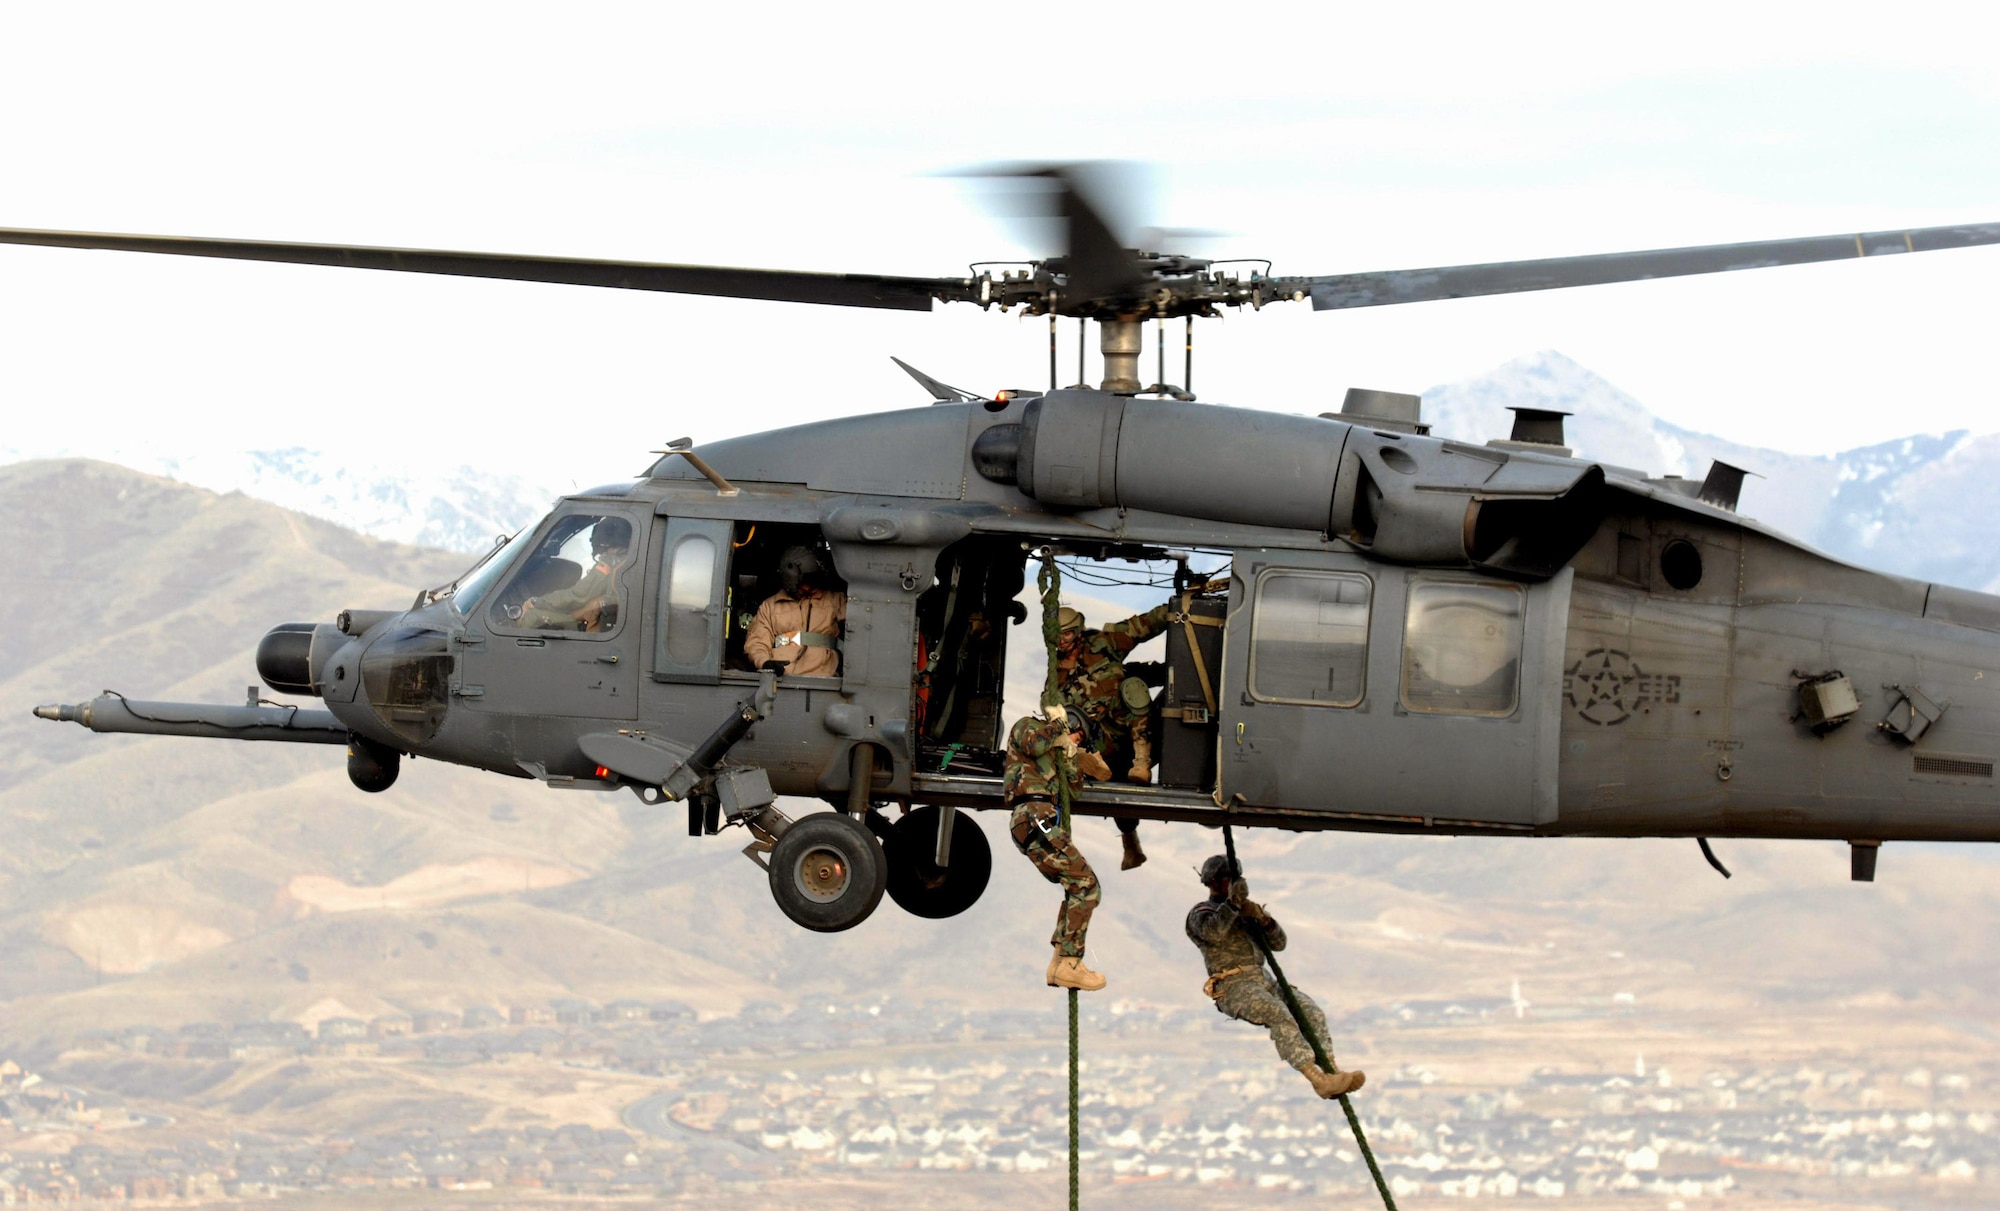 A Utah National Guard Soldier and 19th Special Forces member are lifted on board an HH-60 Pave Hawk during a combat search and rescue integration exercise Nov. 9 over the Utah Test and Training Range. Members of the 34th Weapons Squadron from Nellis AFB led the search and recovery training. The exercise expanded the integration with Utah's 211th Aviation Group AH-64 Apache Joint Rotary Wing, 4th Fighter Squadron F-16 Fighting Falcon assets from Hill AFB, Utah, and special operations forces. Exercise participants also conducted extensive joint combat search and rescue operations against surface-to-air threats. The exercise is being run held Nov. 6 through 15. (U.S. Air Force photo/Master Sgt. Kevin J. Gruenwald) 
